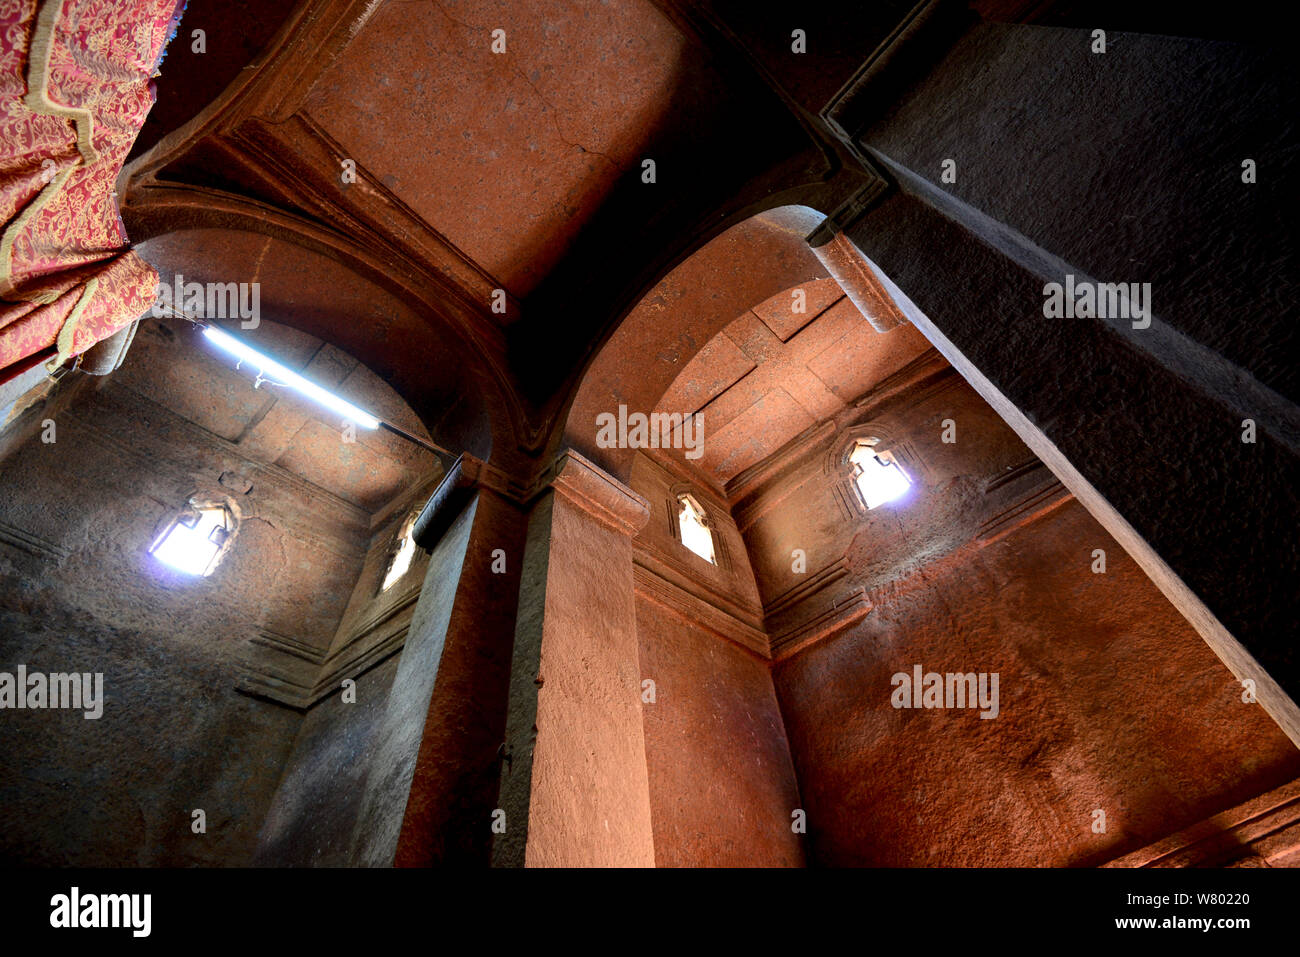 View looking up to archways, in rock hewn church - Bet Giyorgis Church, Lalibela. UNESCO World Heritage Site. Ethiopia, December 2014. Stock Photo